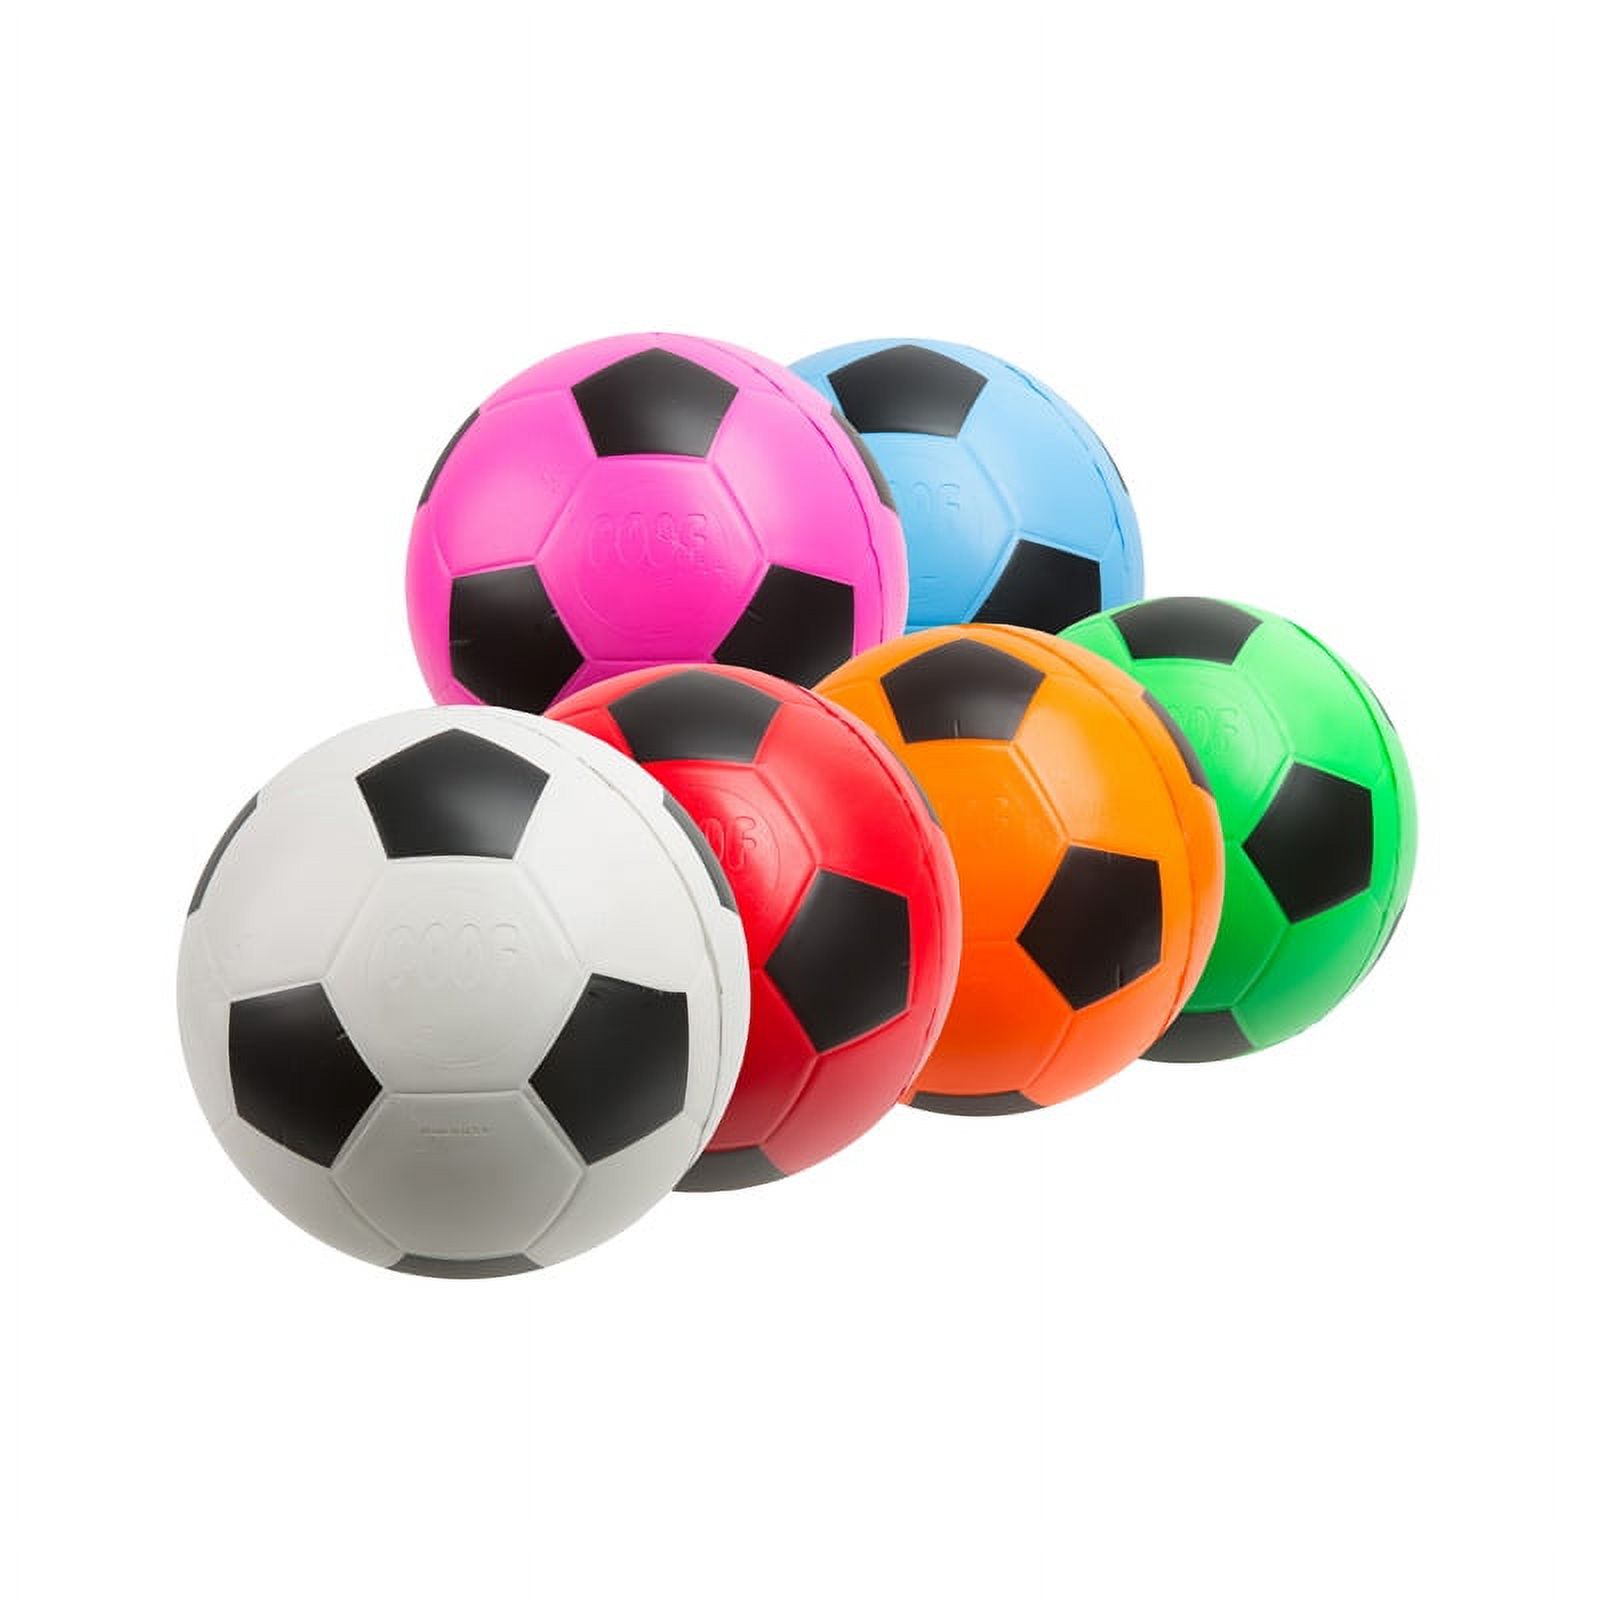 POOF Standard Soccerball Assortment - image 1 of 2